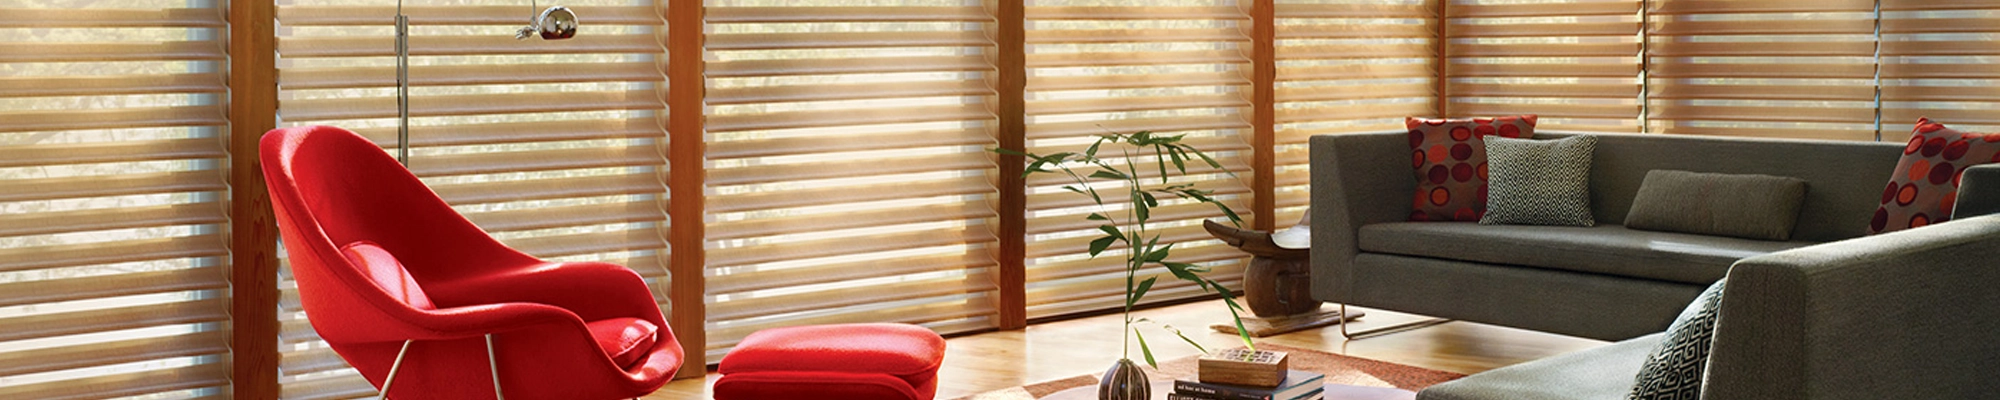 Window treatments provided by Crown Carpet Colortile